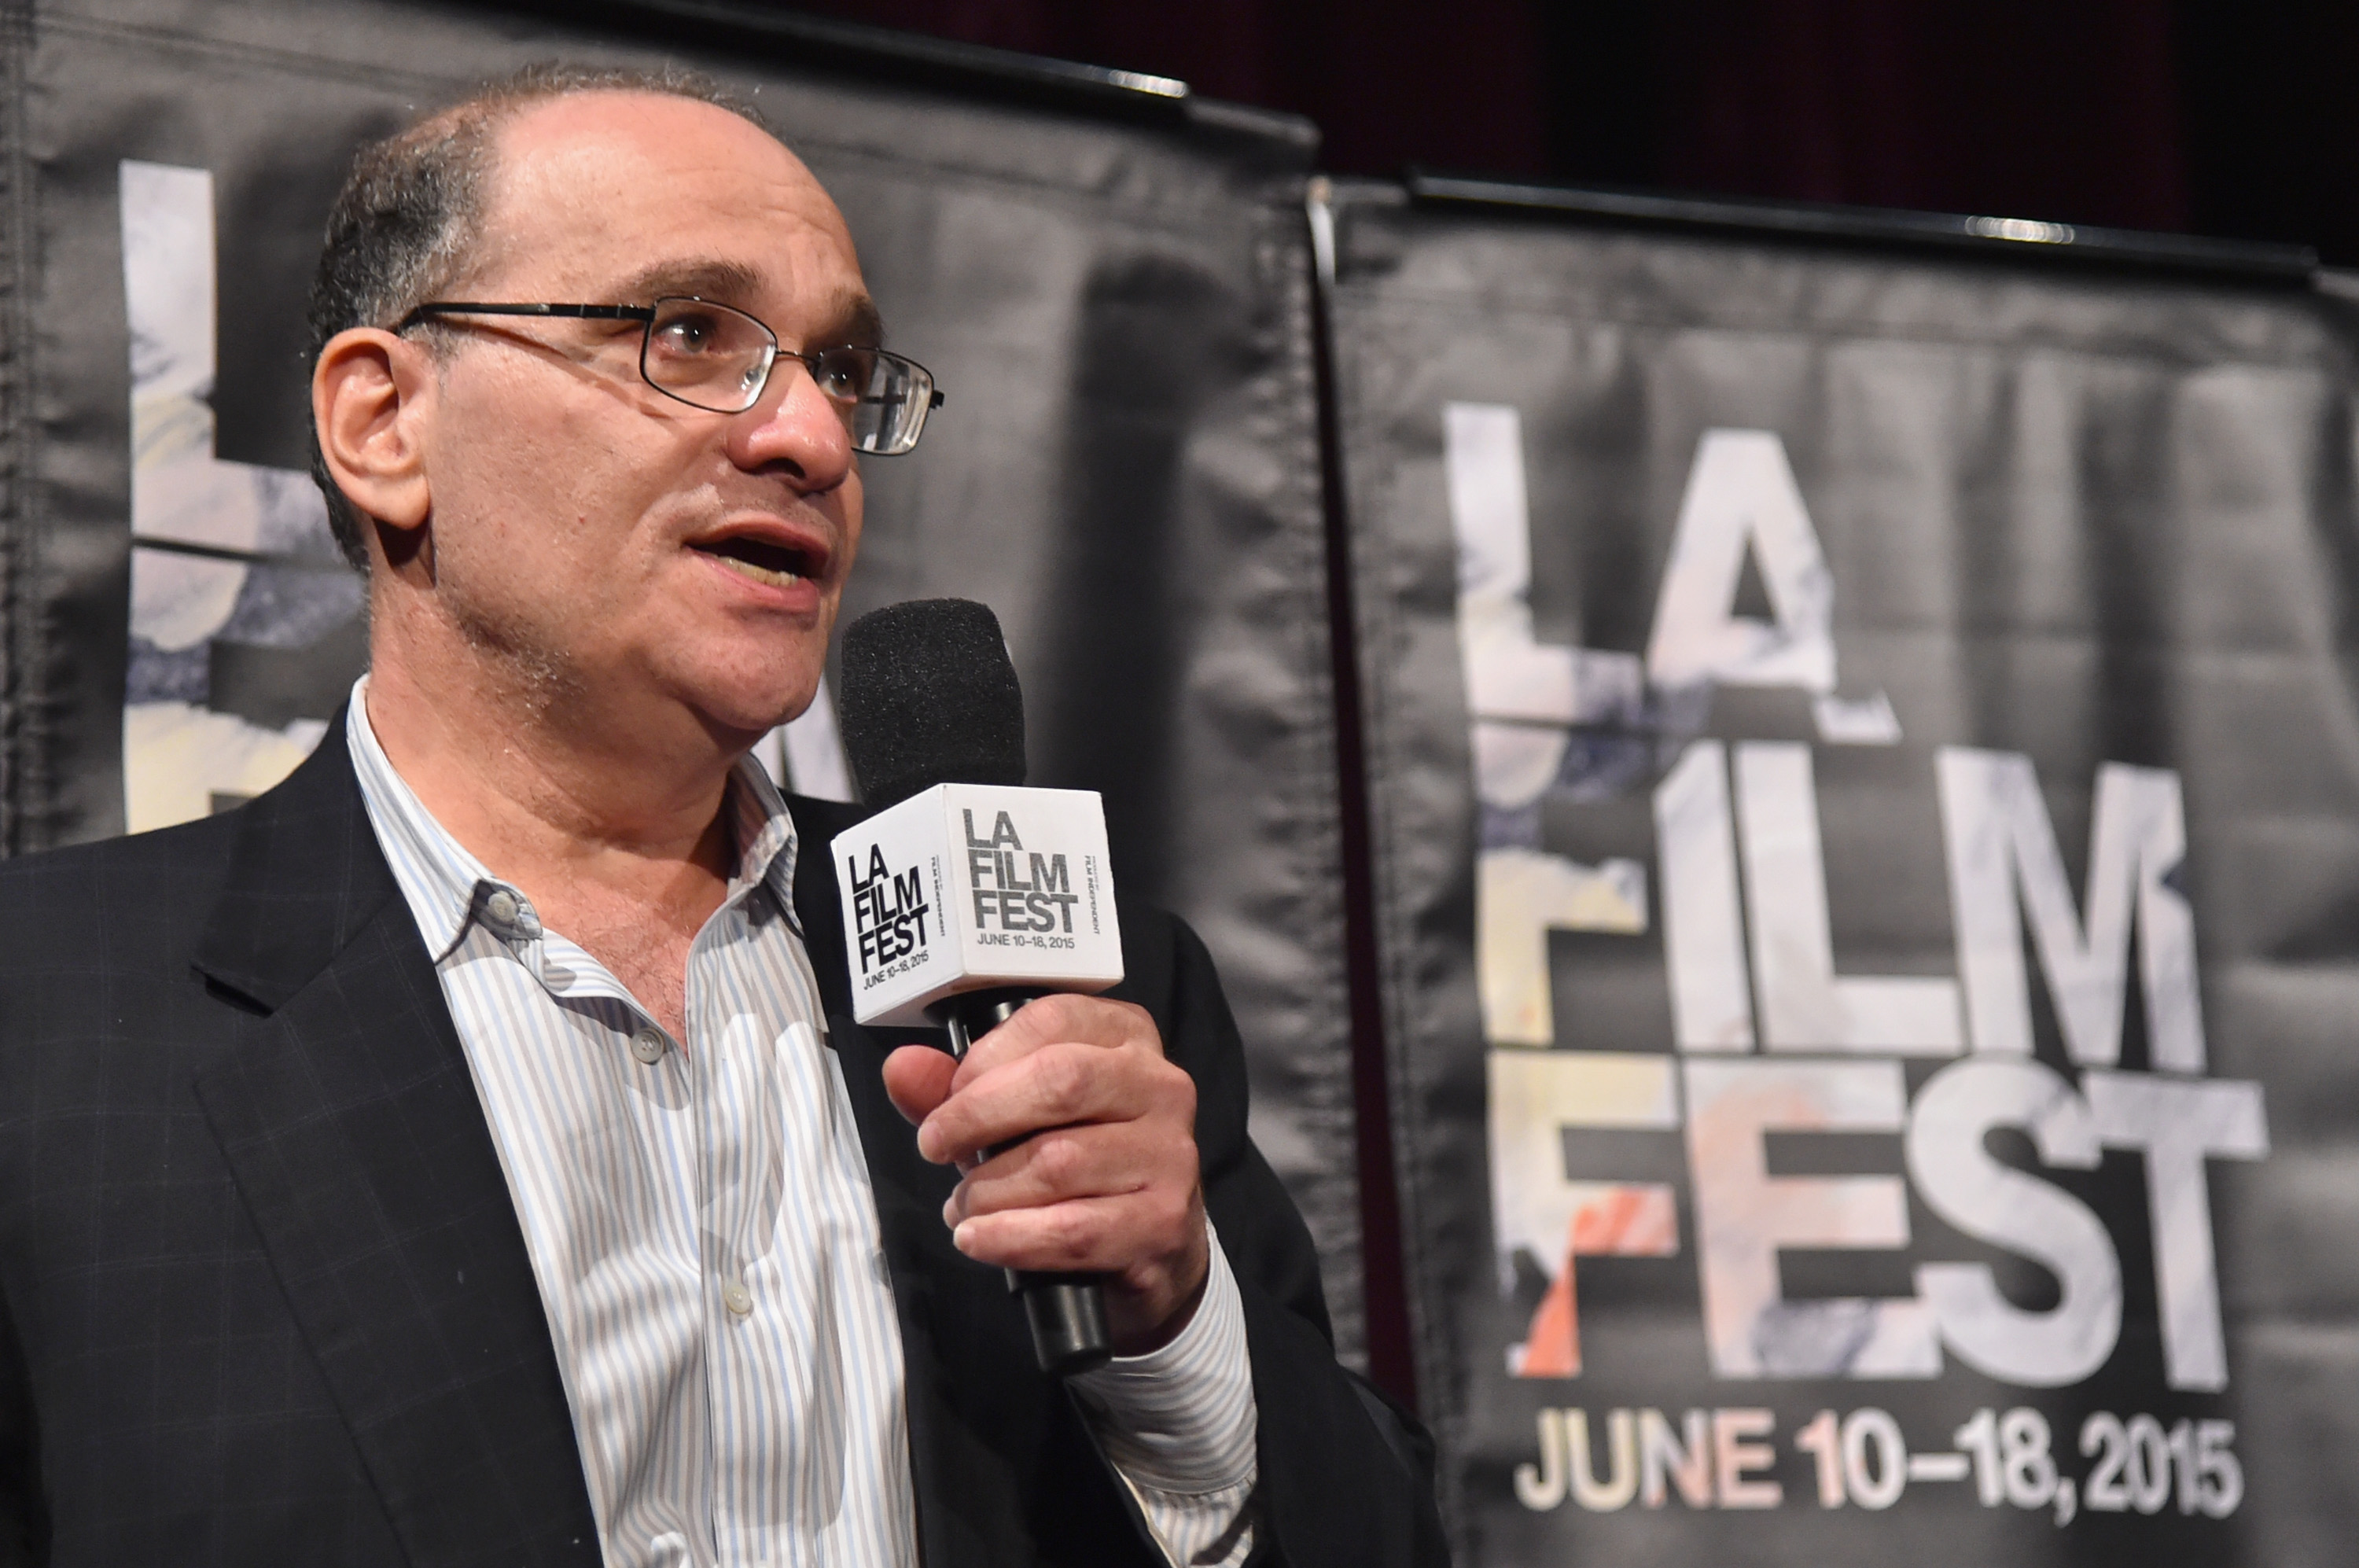 LOS ANGELES, CA - JUNE 14: Executive producer Bob Weinstein attends the MTV and Dimension TV premiere of "Scream" at the Los Angeles Film Festival on June 14, 2015 in Los Angeles, California. (Photo by Alberto E. Rodriguez/WireImage for MTV Communications) (Alberto E. Rodriguez—WireImage for MTV Communications)